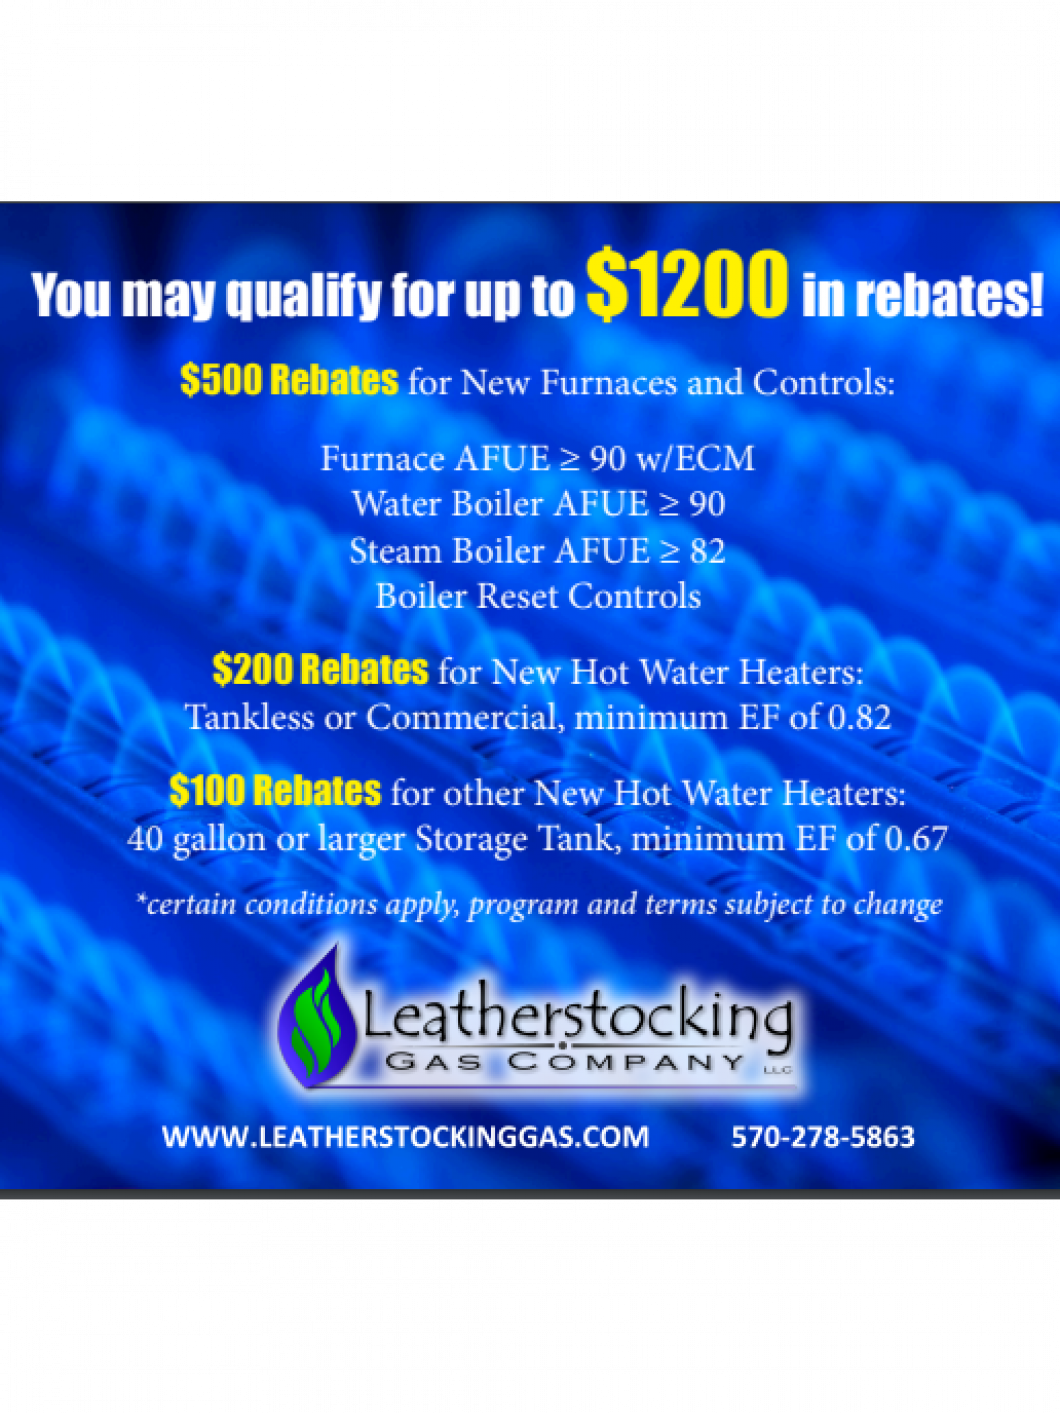 furnace-and-hot-water-heater-rebates-leatherstocking-gas-company